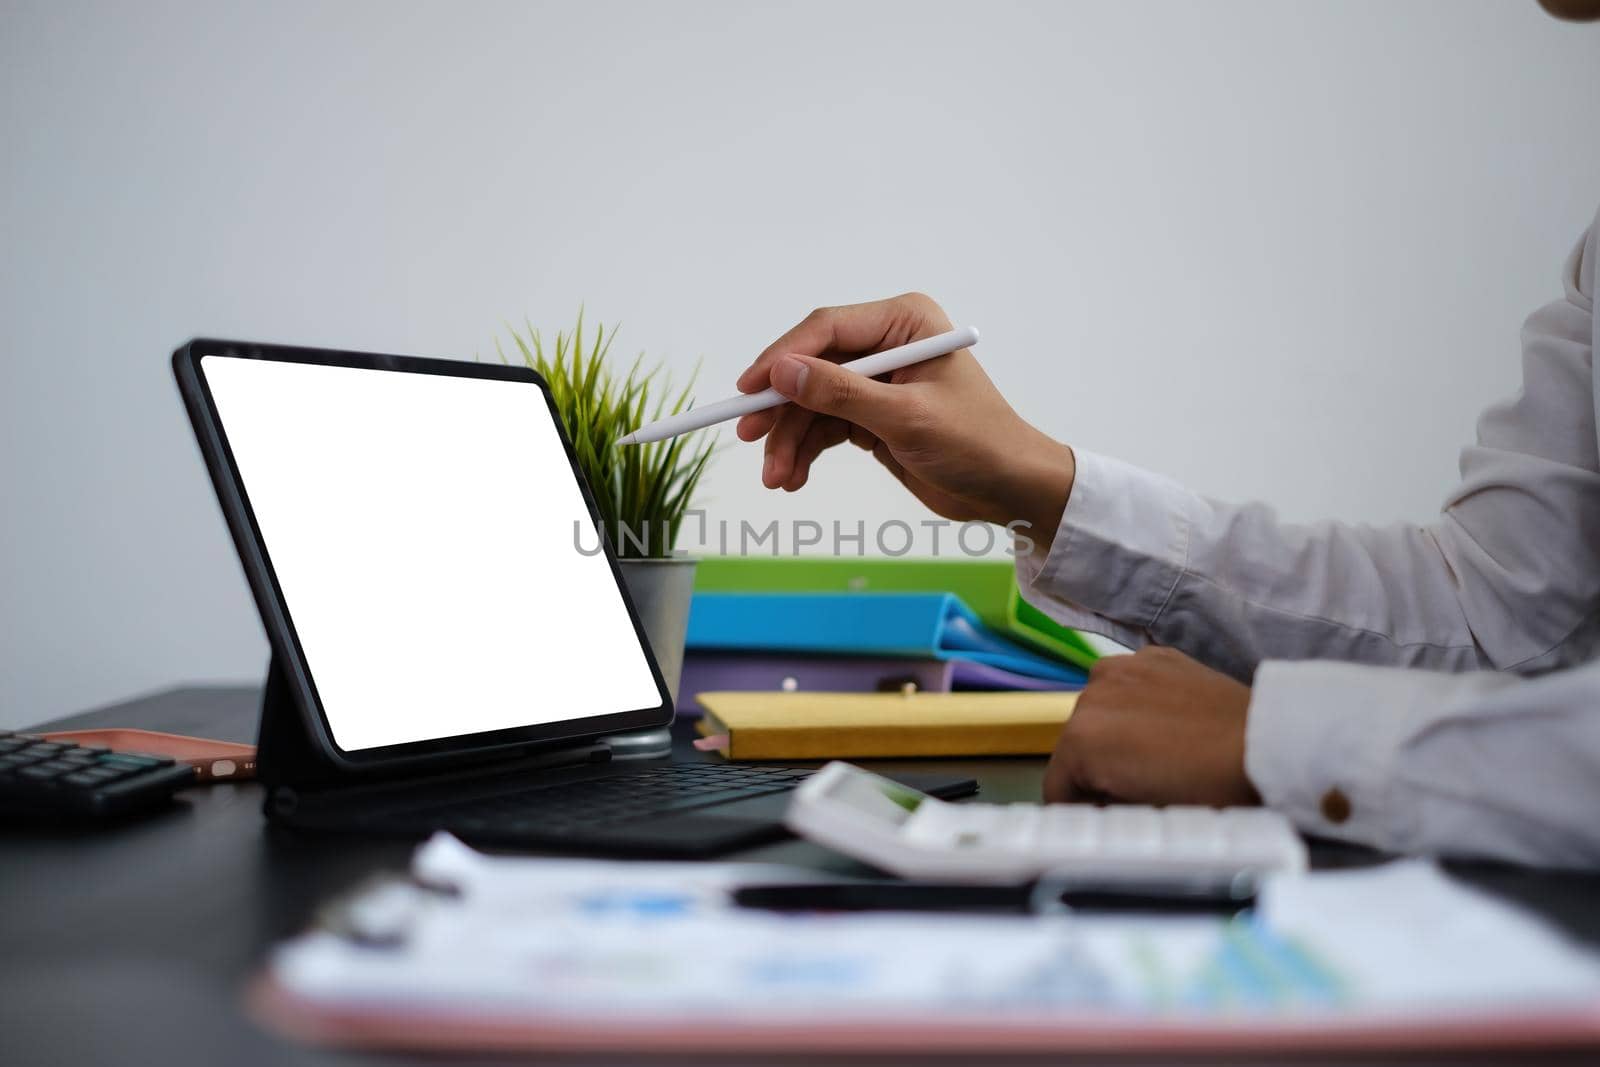 Cretive man in white dress smiling holding stylus pencil and coffee in home office. Work from home concept.